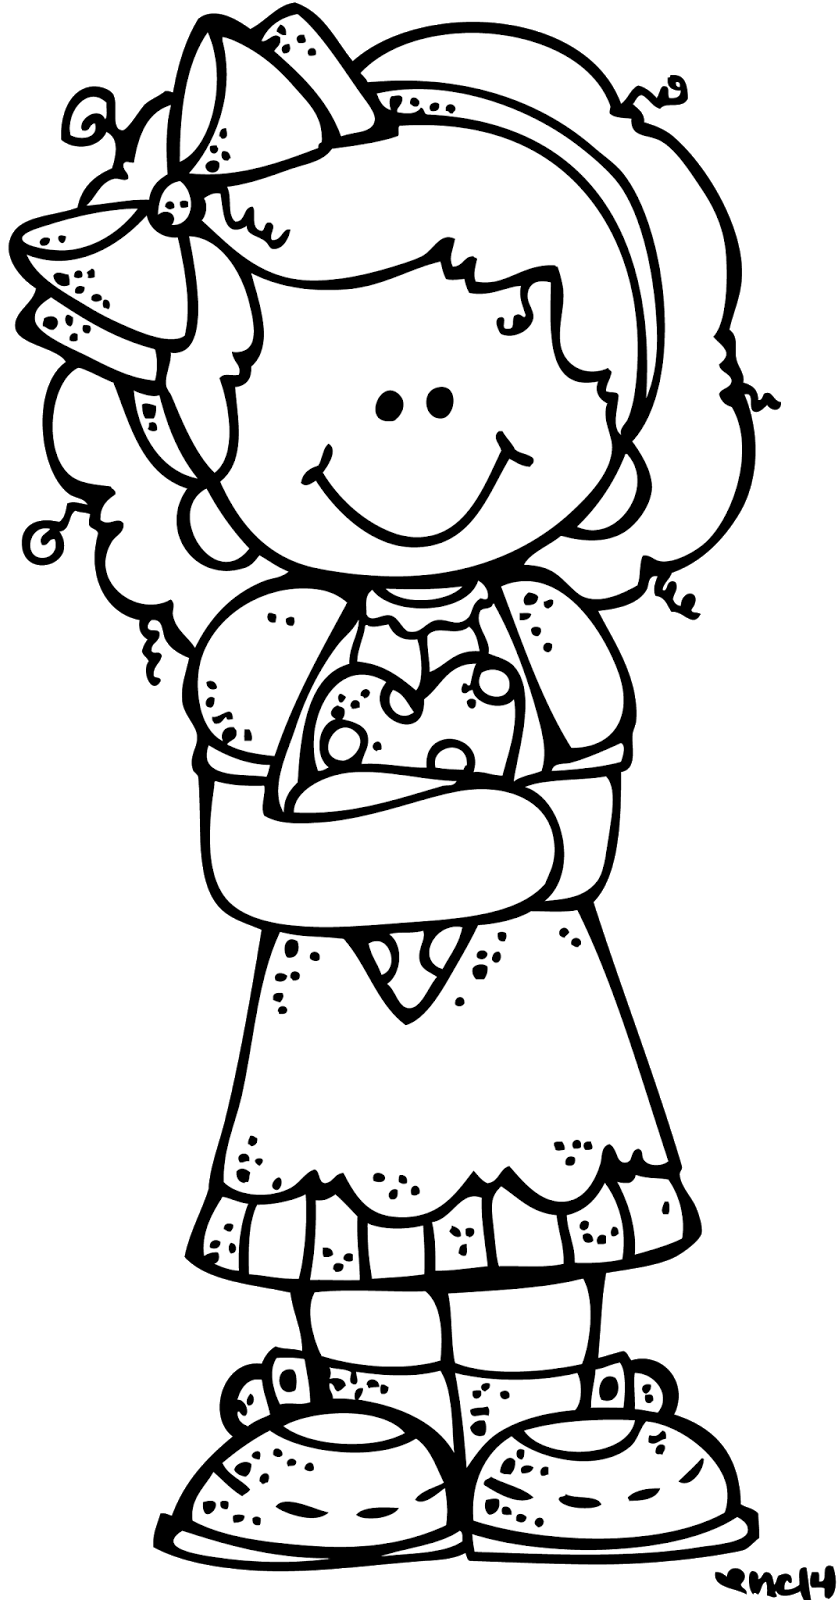 lds clipart boy and girl - photo #18